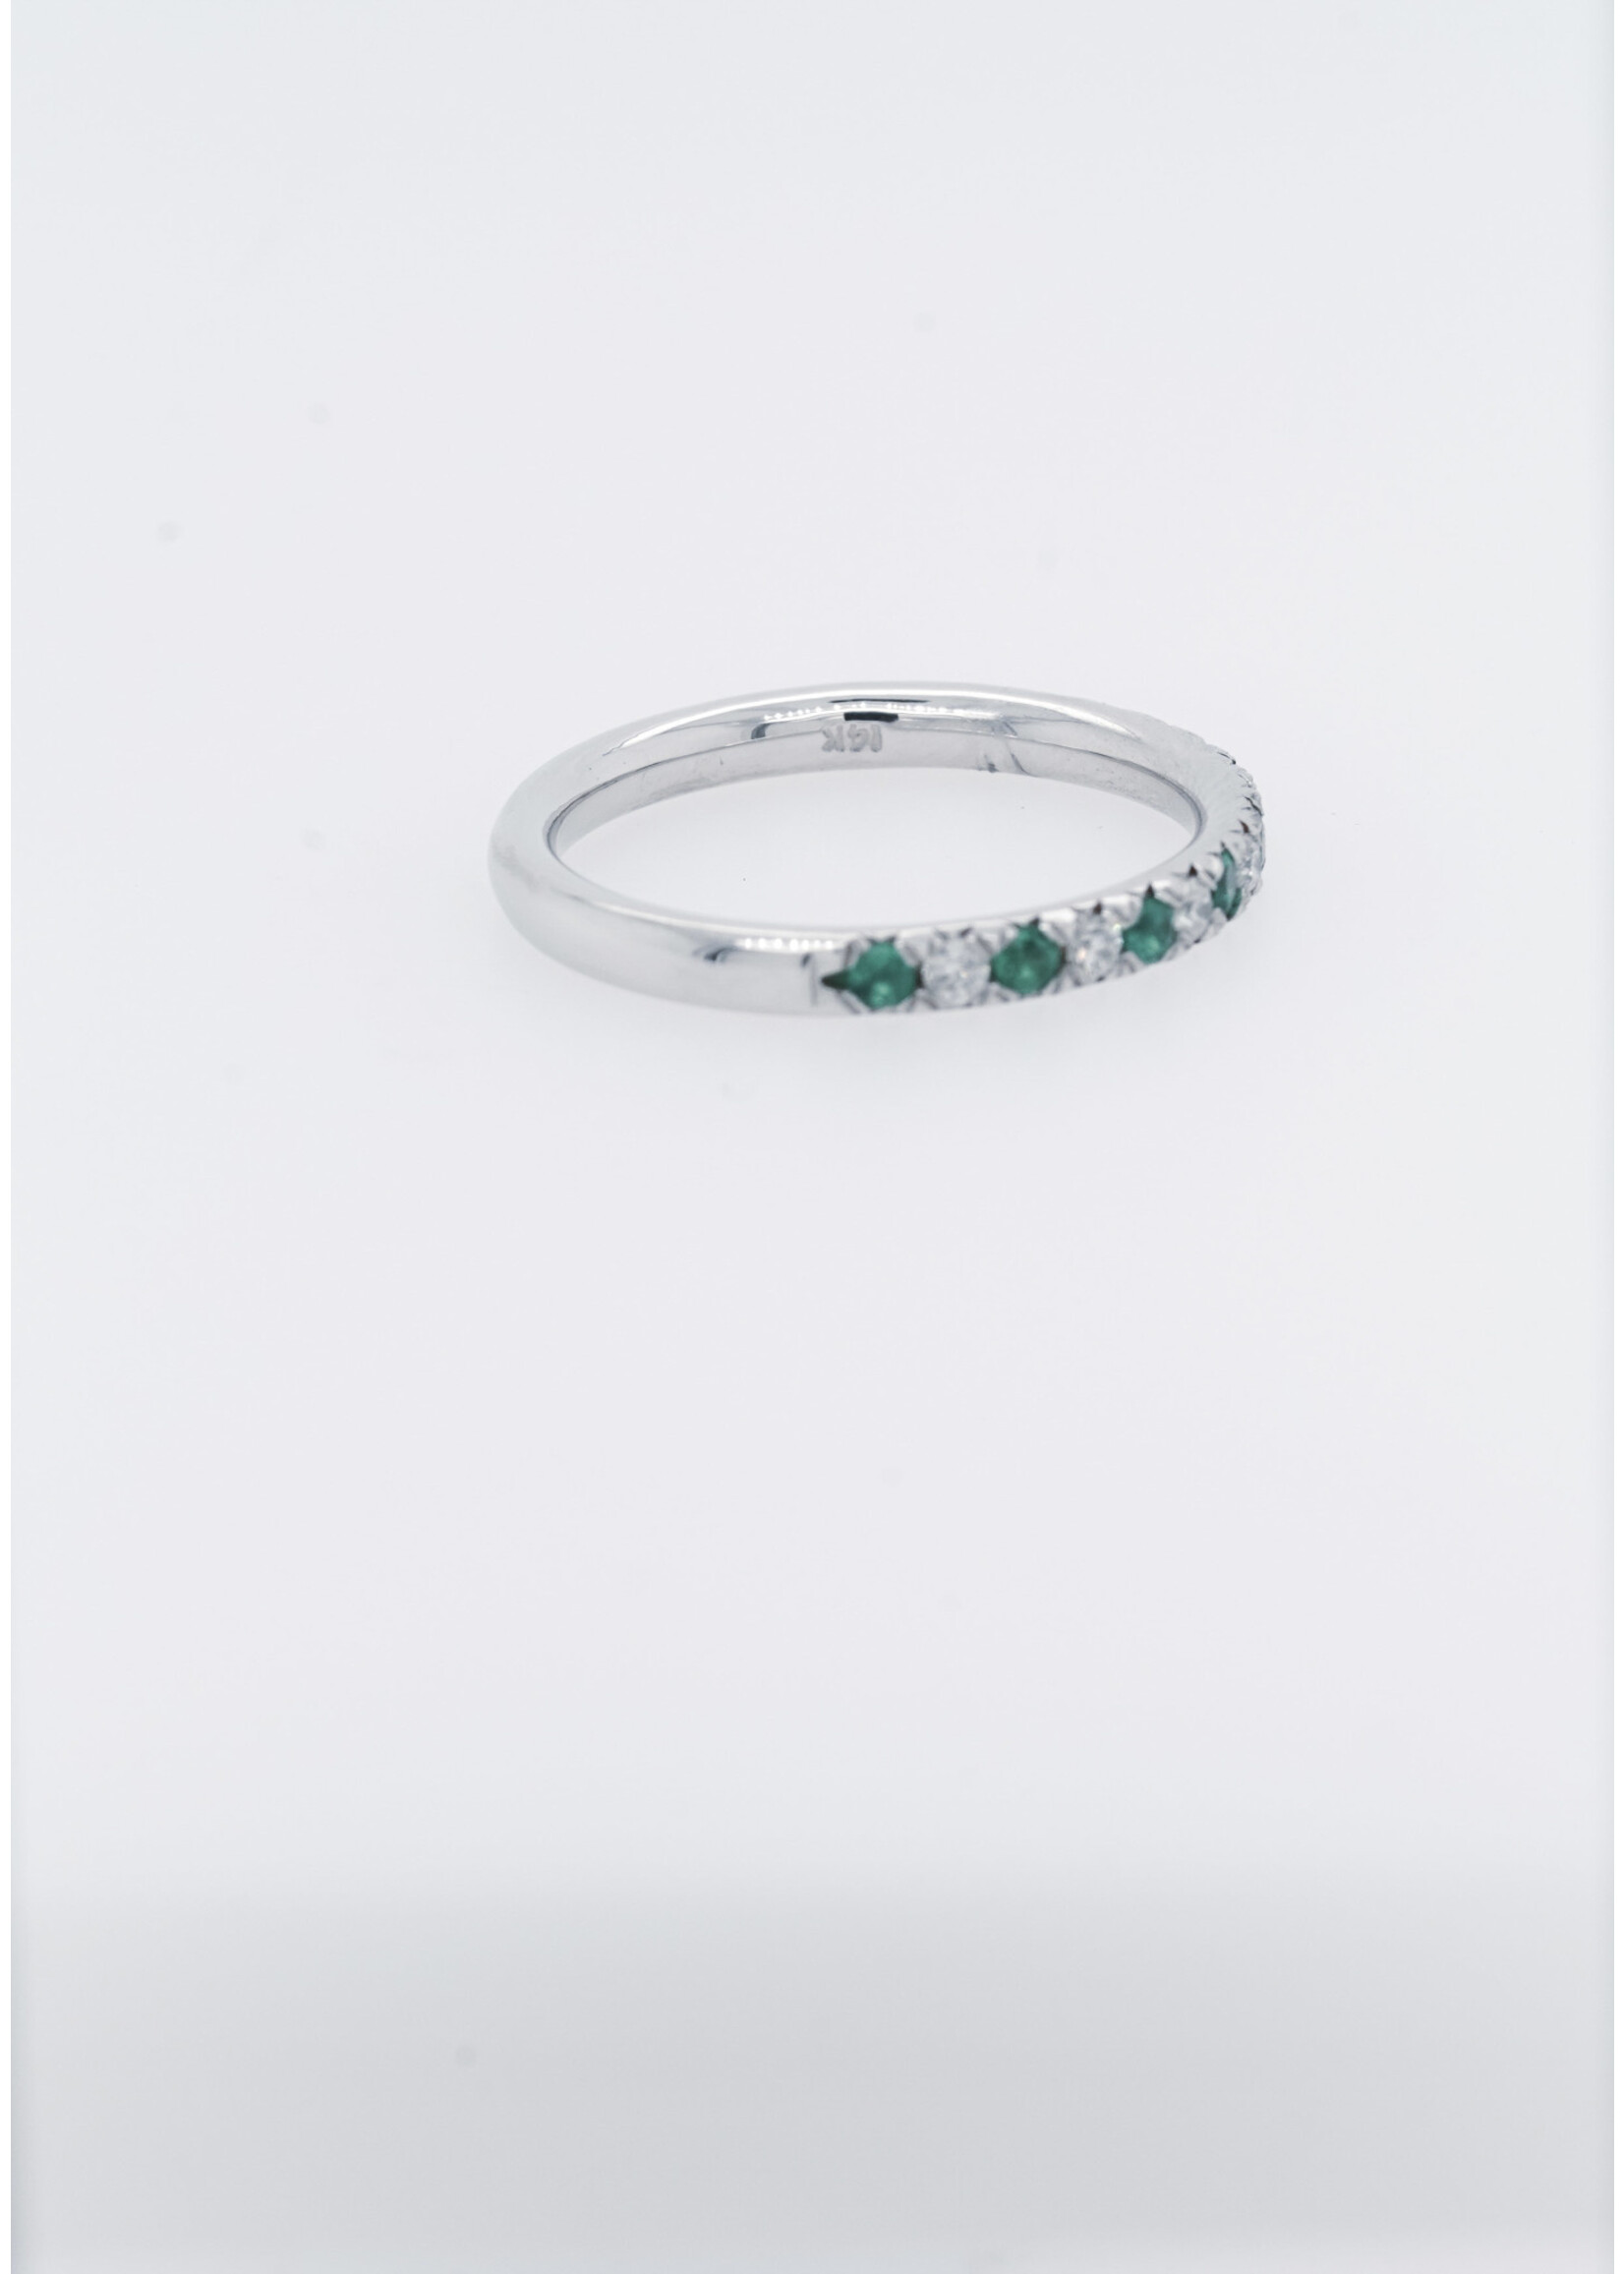 14KW 2.5g .14ctw Diamond .15ctw Emerald Stackable Band (size 6.75)